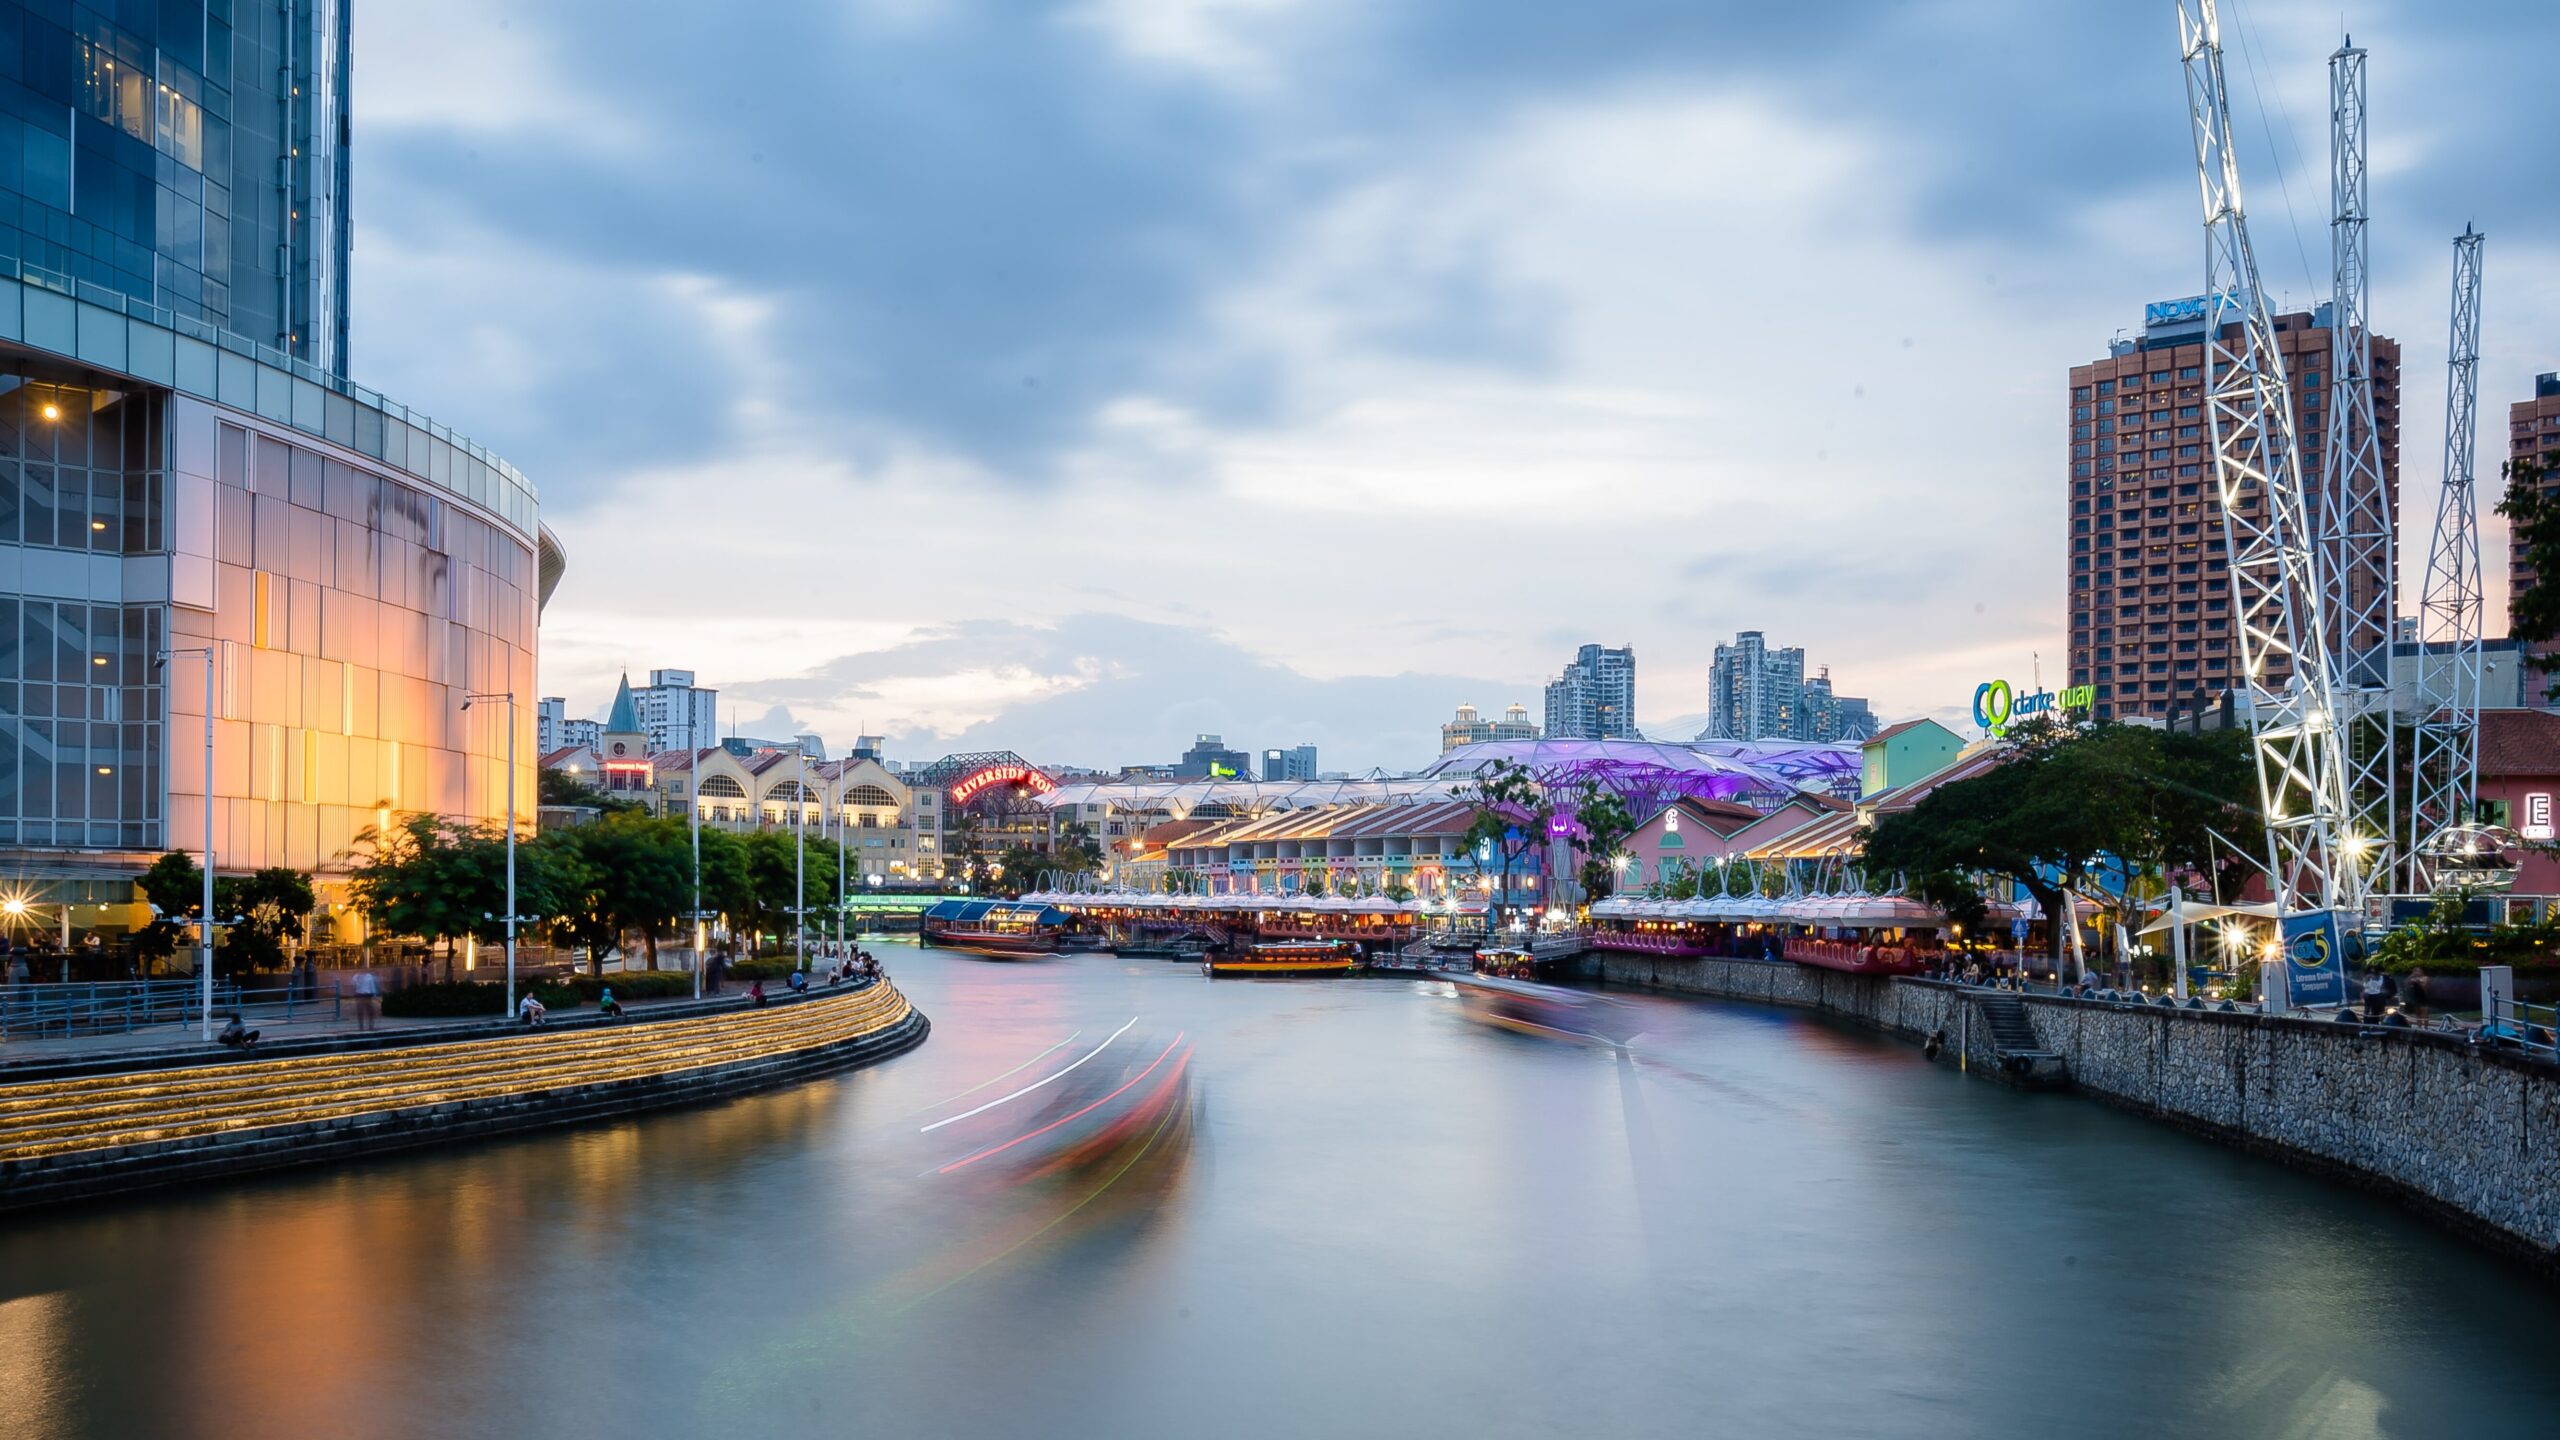 Boats speed along the Singapore river